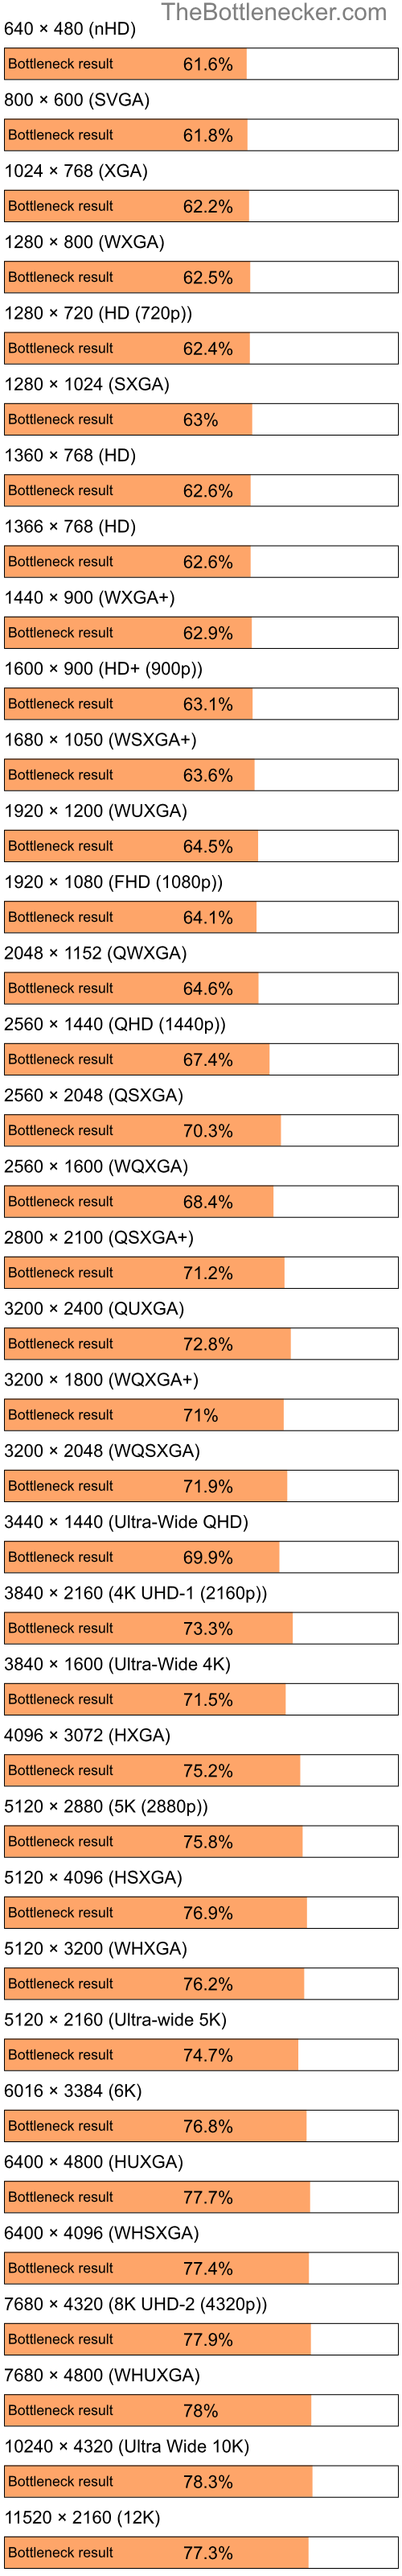 Bottleneck results by resolution for Intel Atom Z520 and AMD Radeon HD 4270 in7 Days to Die